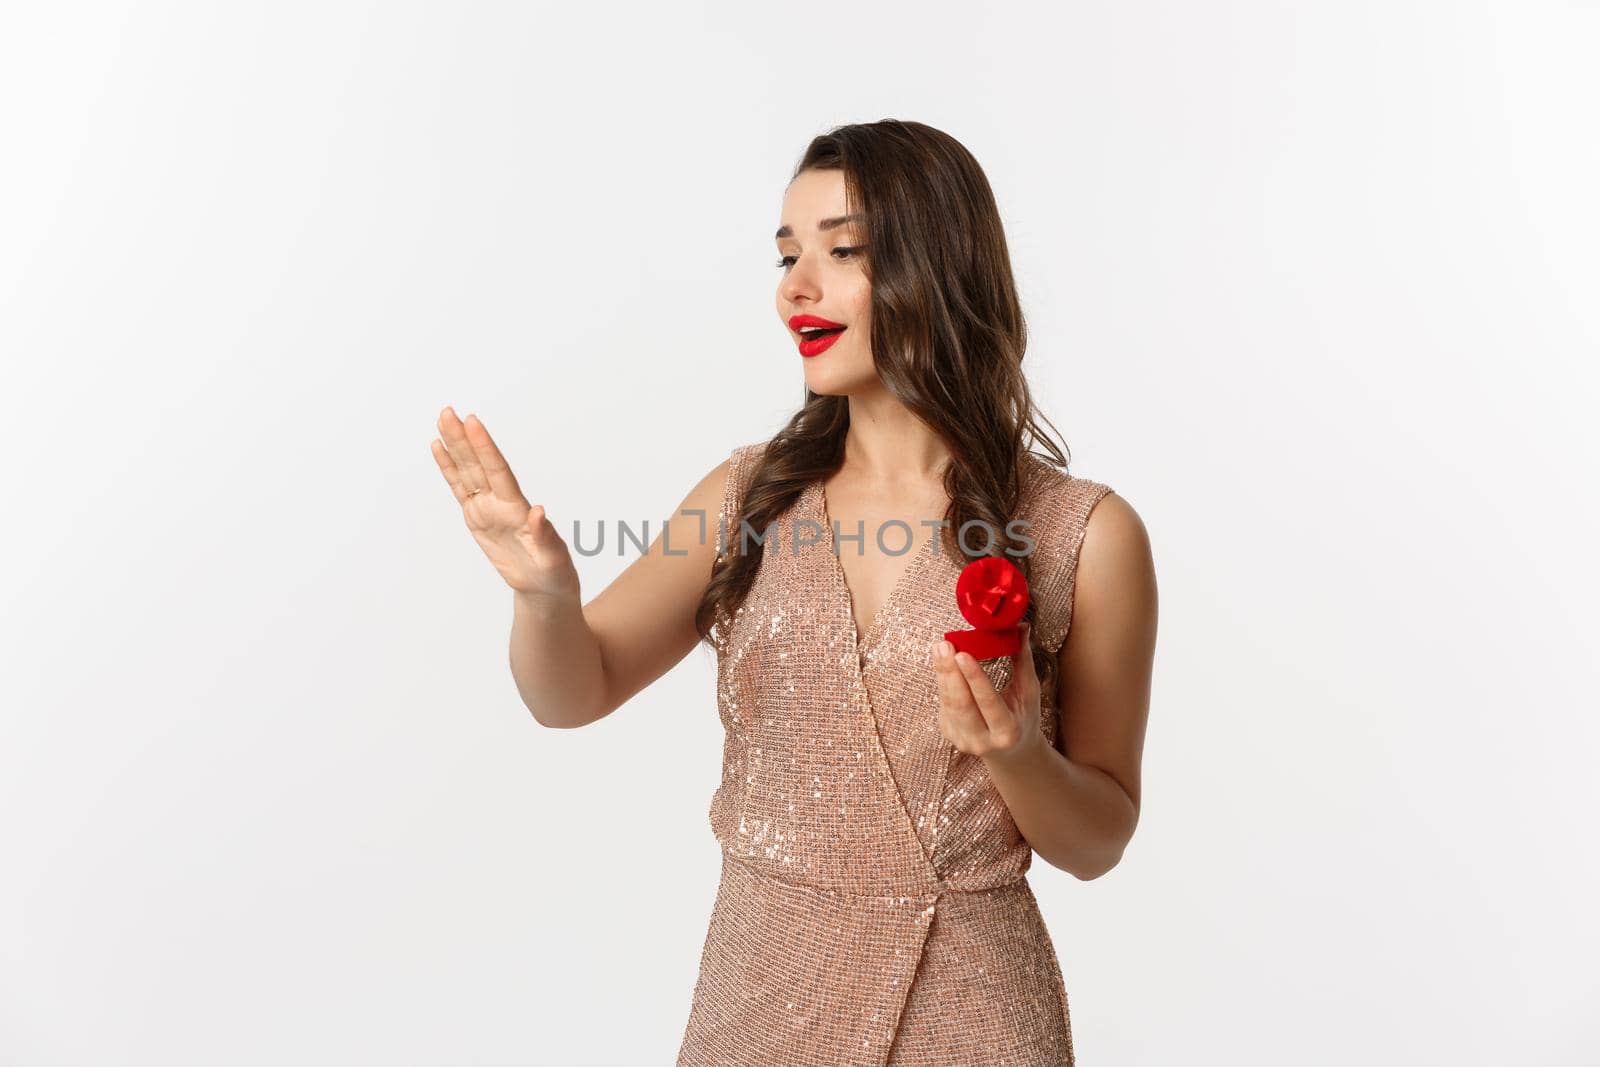 Beautiful woman in luxury dress, trying on engagement ring, saying yes to marriage proposal, looking dreamy at hand, standing over white background.